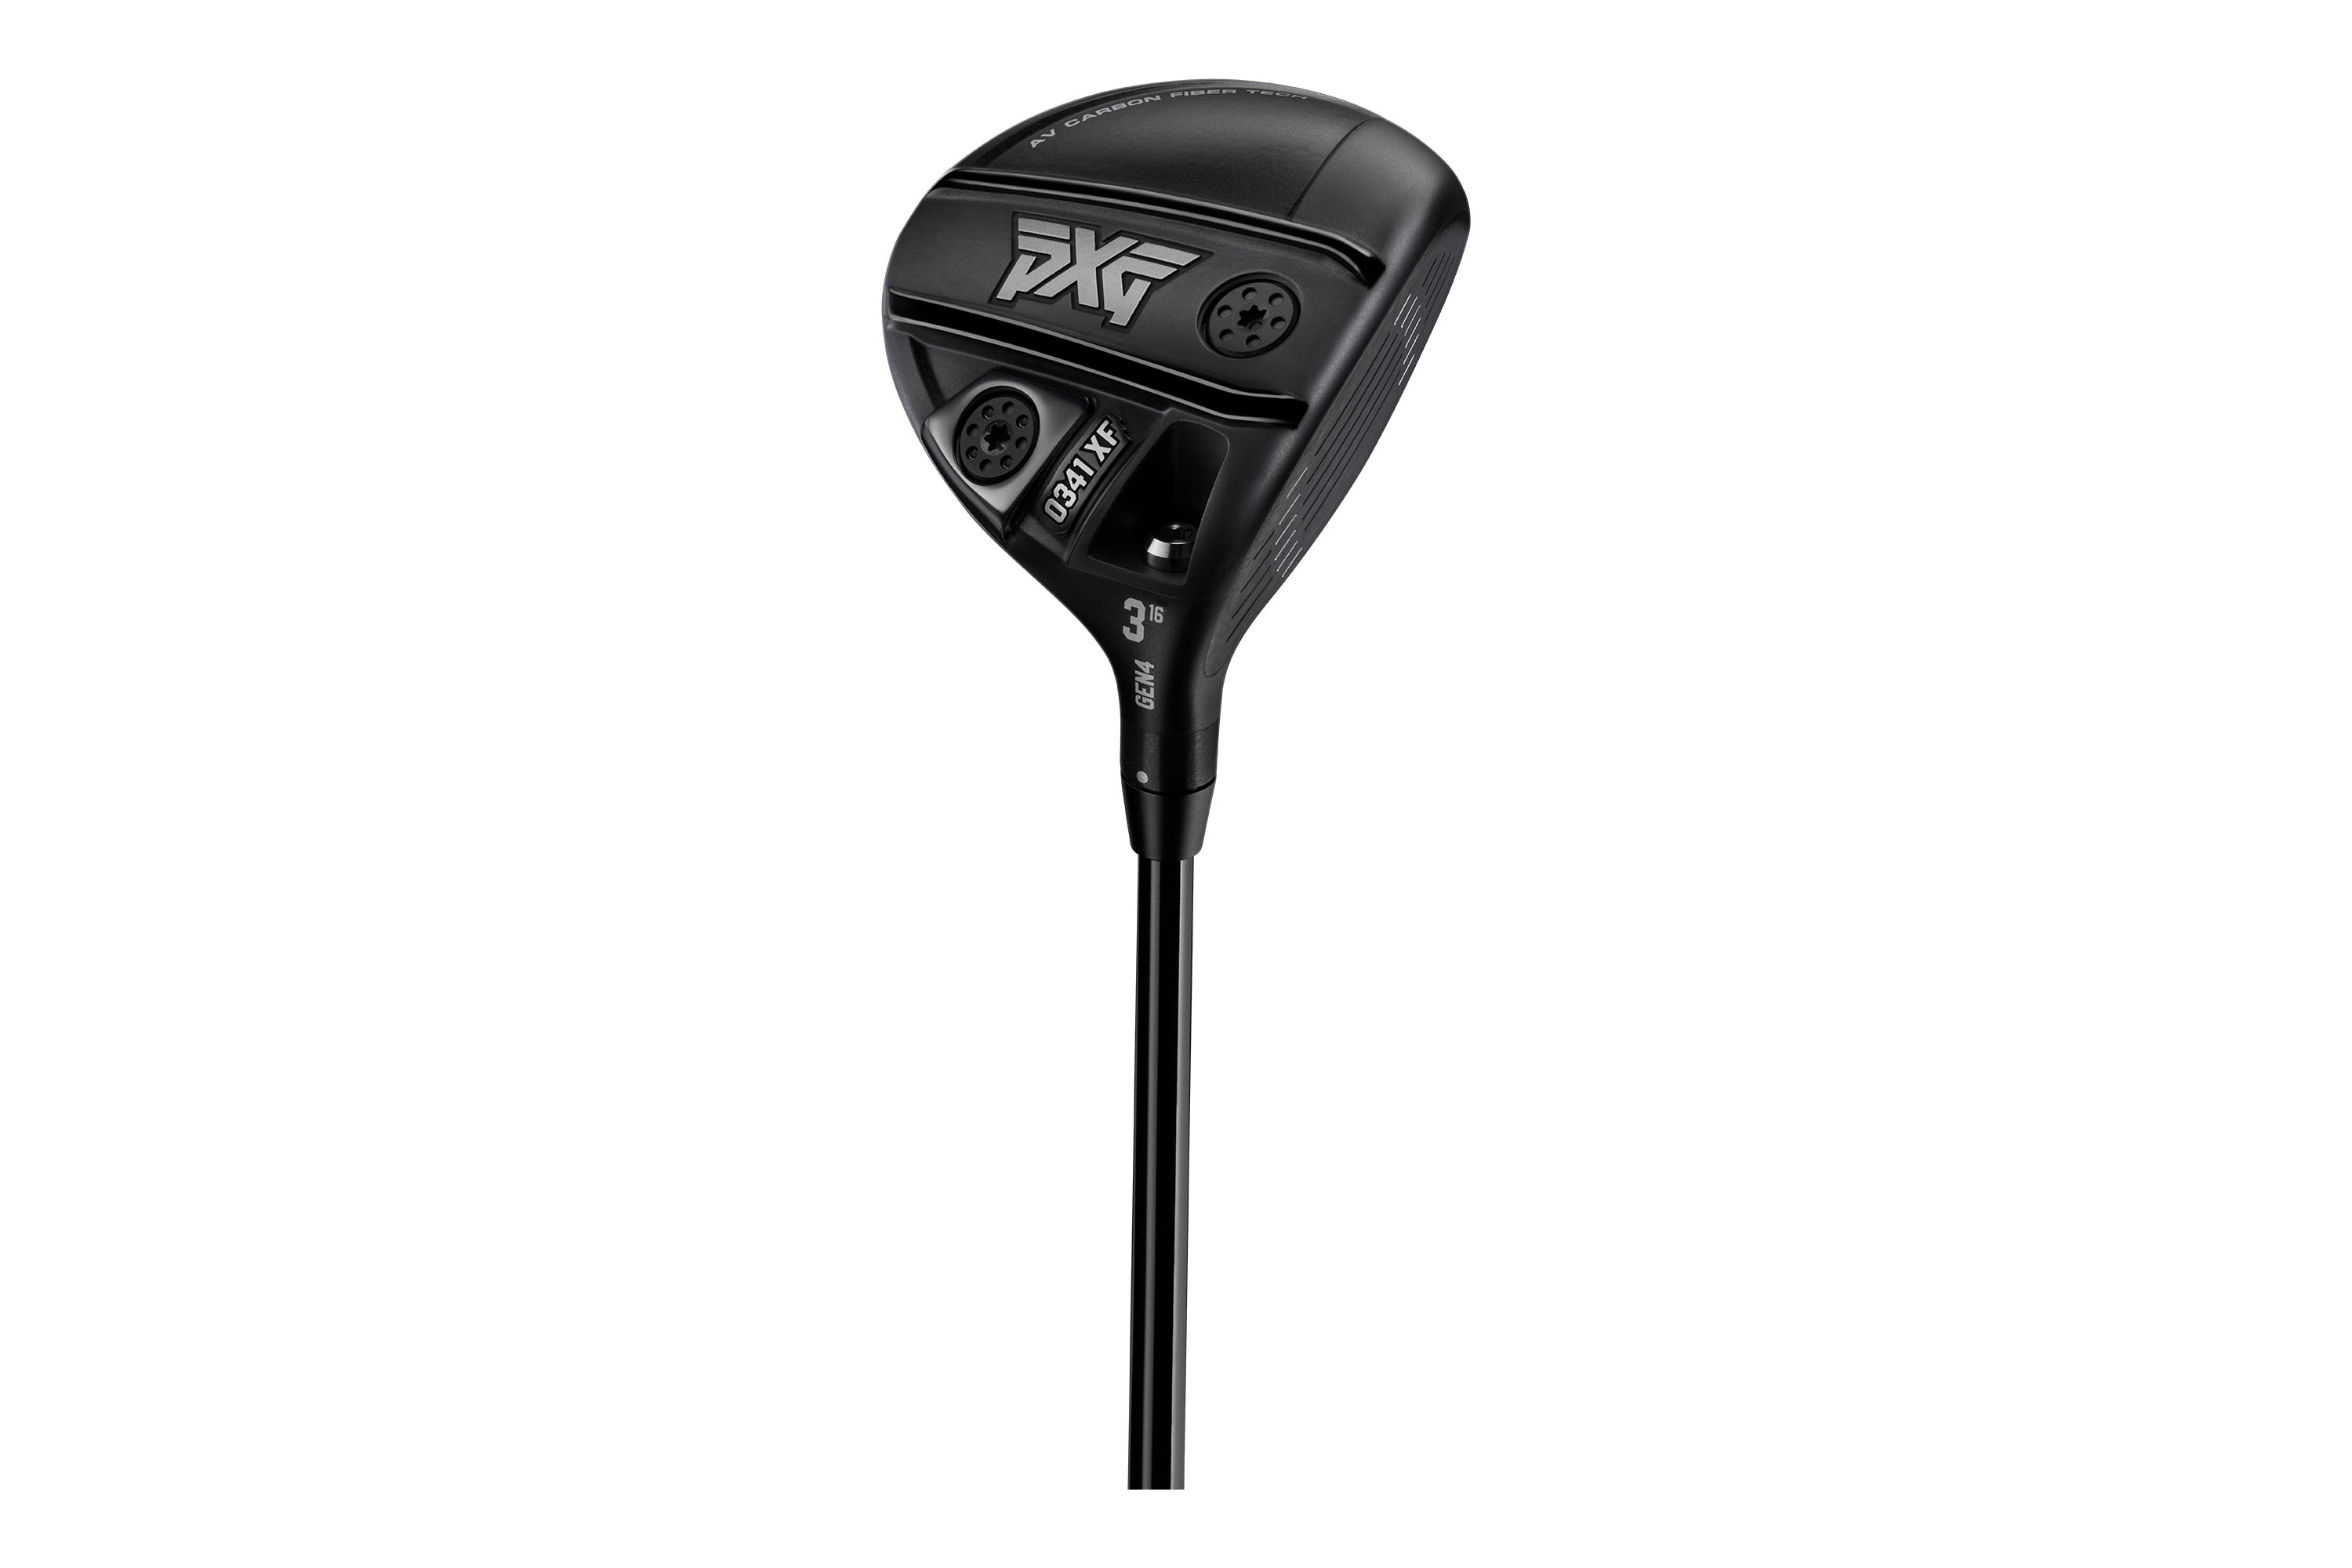 PXG GEN4 fairway woods, hybrids add forgiveness and rails with XF